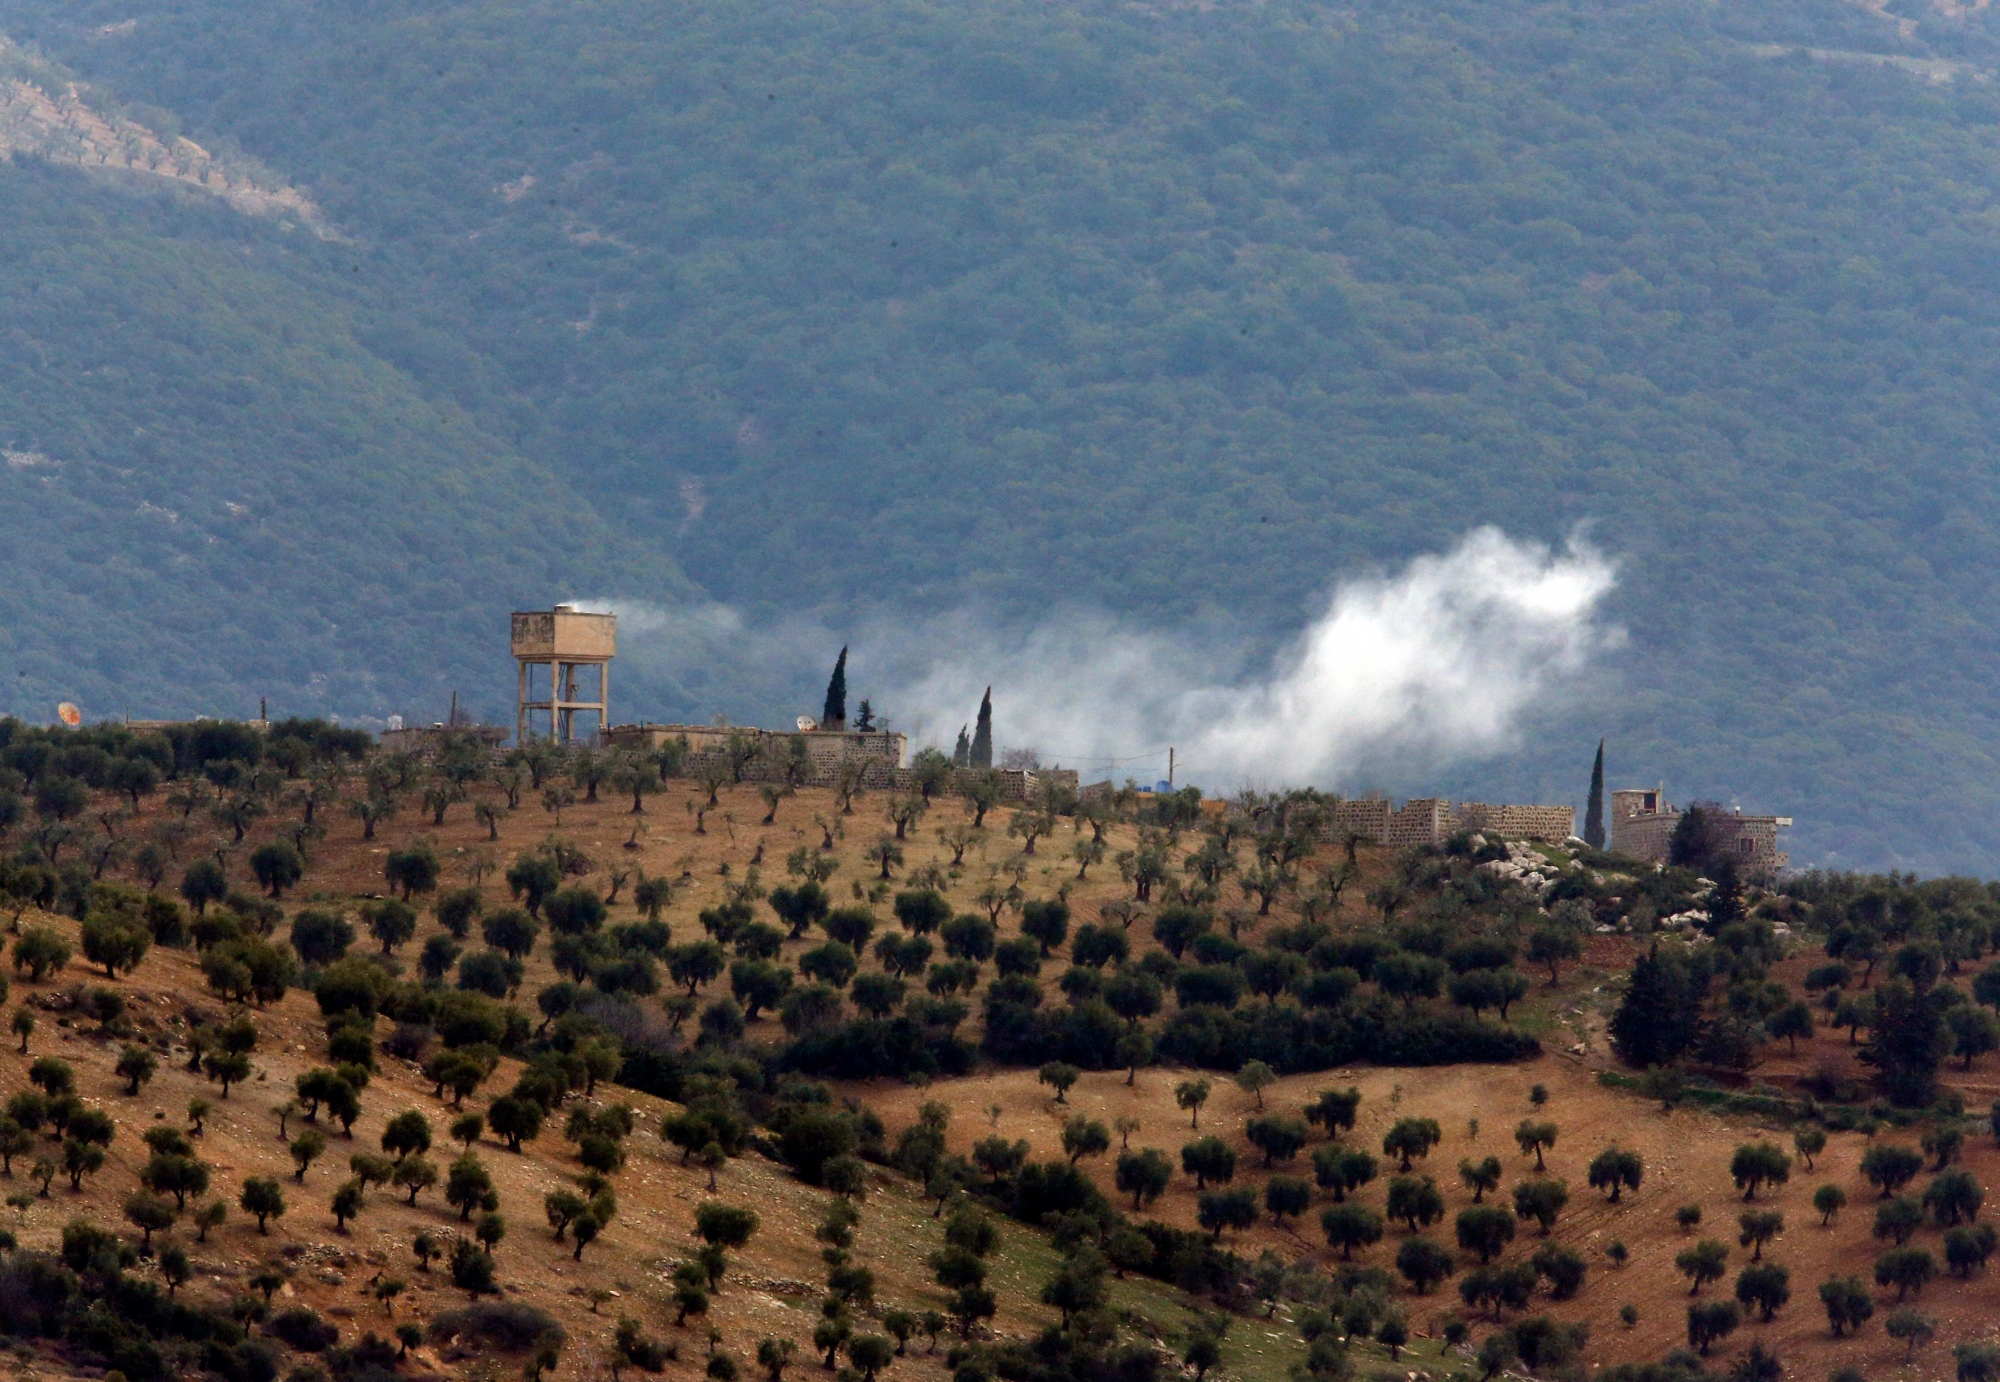 Smoke billows from a position inside Syria, after a Turkish Army artillery fired, as seen from the outskirts of the village of Sugedigi, Turkey, adjacent to the border with Syria, Sunday, Jan. 21, 2018.  Turkey's ground troops entered the enclave of Afrin, in northern Syria on Sunday and were advancing with Turkish-backed Syrian opposition forces in their bid to oust Syrian Kurdish forces from the region.(AP Photo/Lefteris Pitarakis) Turkey Syria